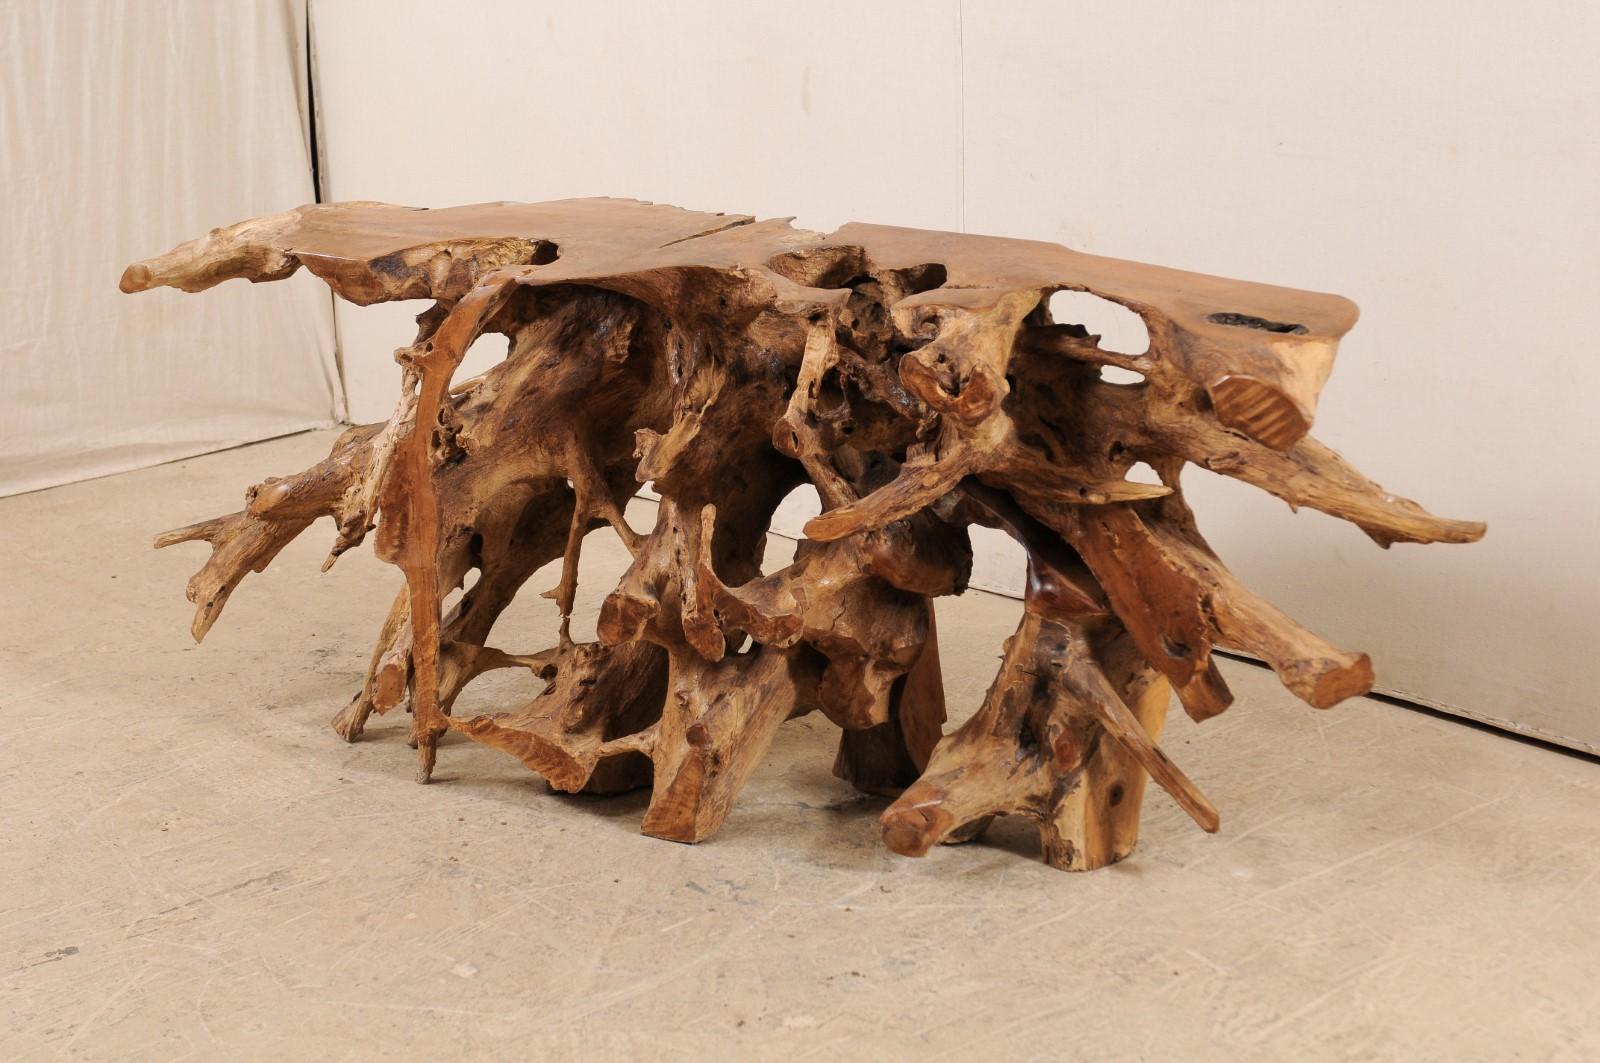 Carved A 6+ Ft Long Natural Teak Root Console Table- An Art Piece by Mother Nature!